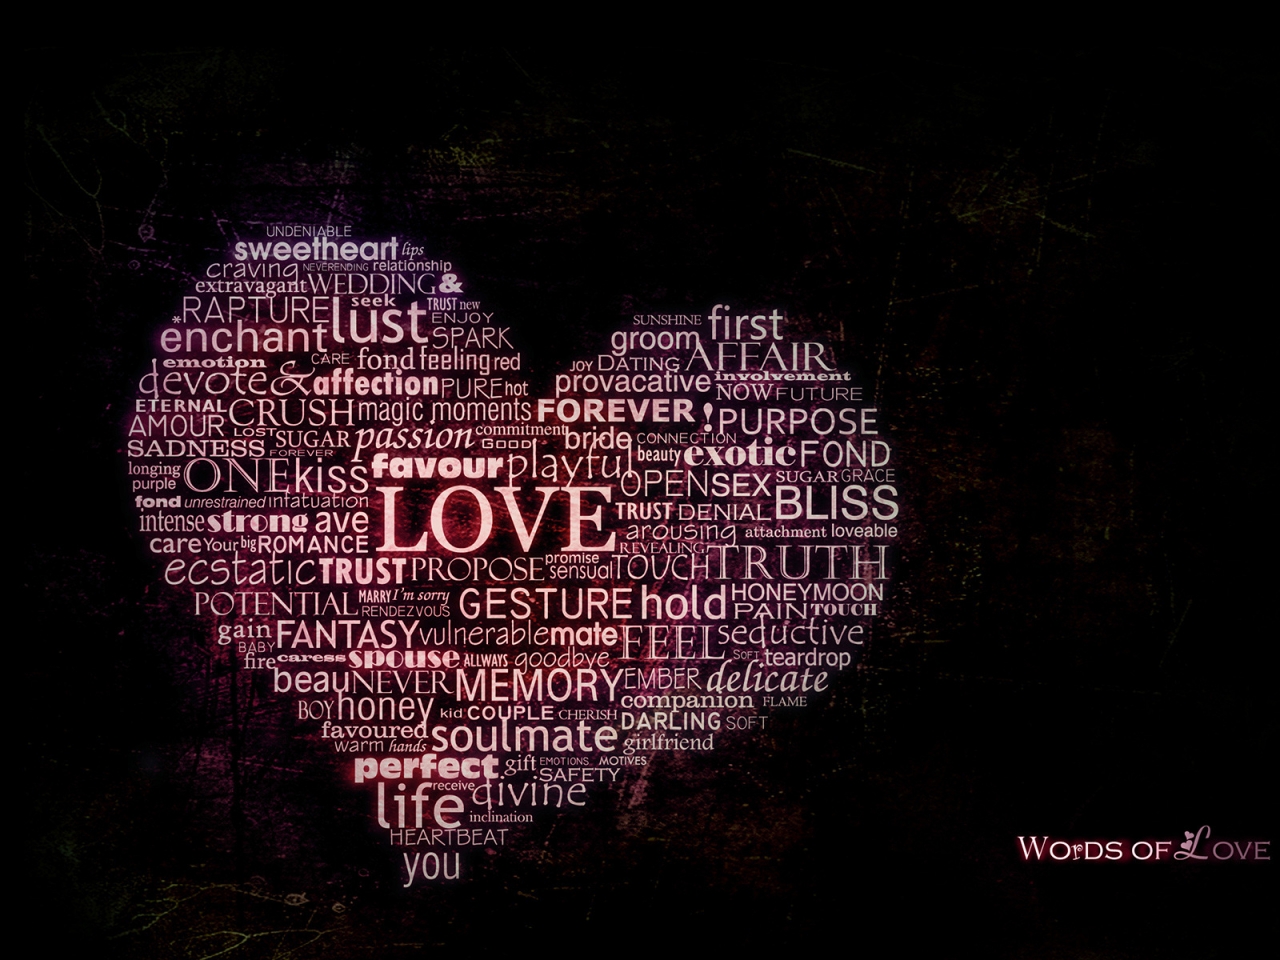 Words of Love for 1280 x 960 resolution